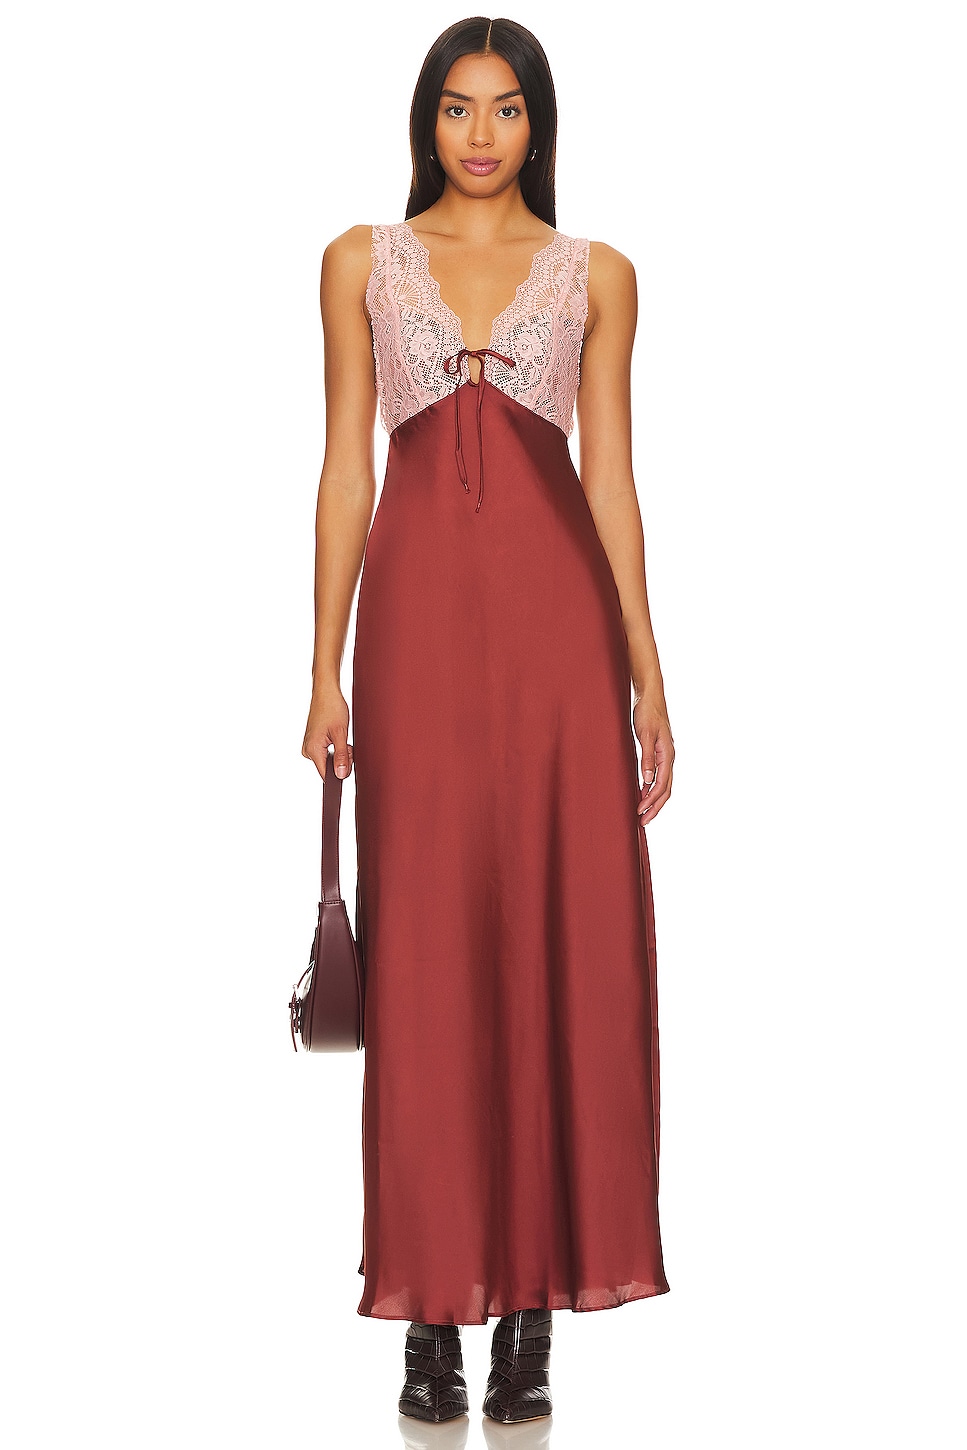 Free People x Intimately FP Country Side Maxi Slip in Sparkling Cider